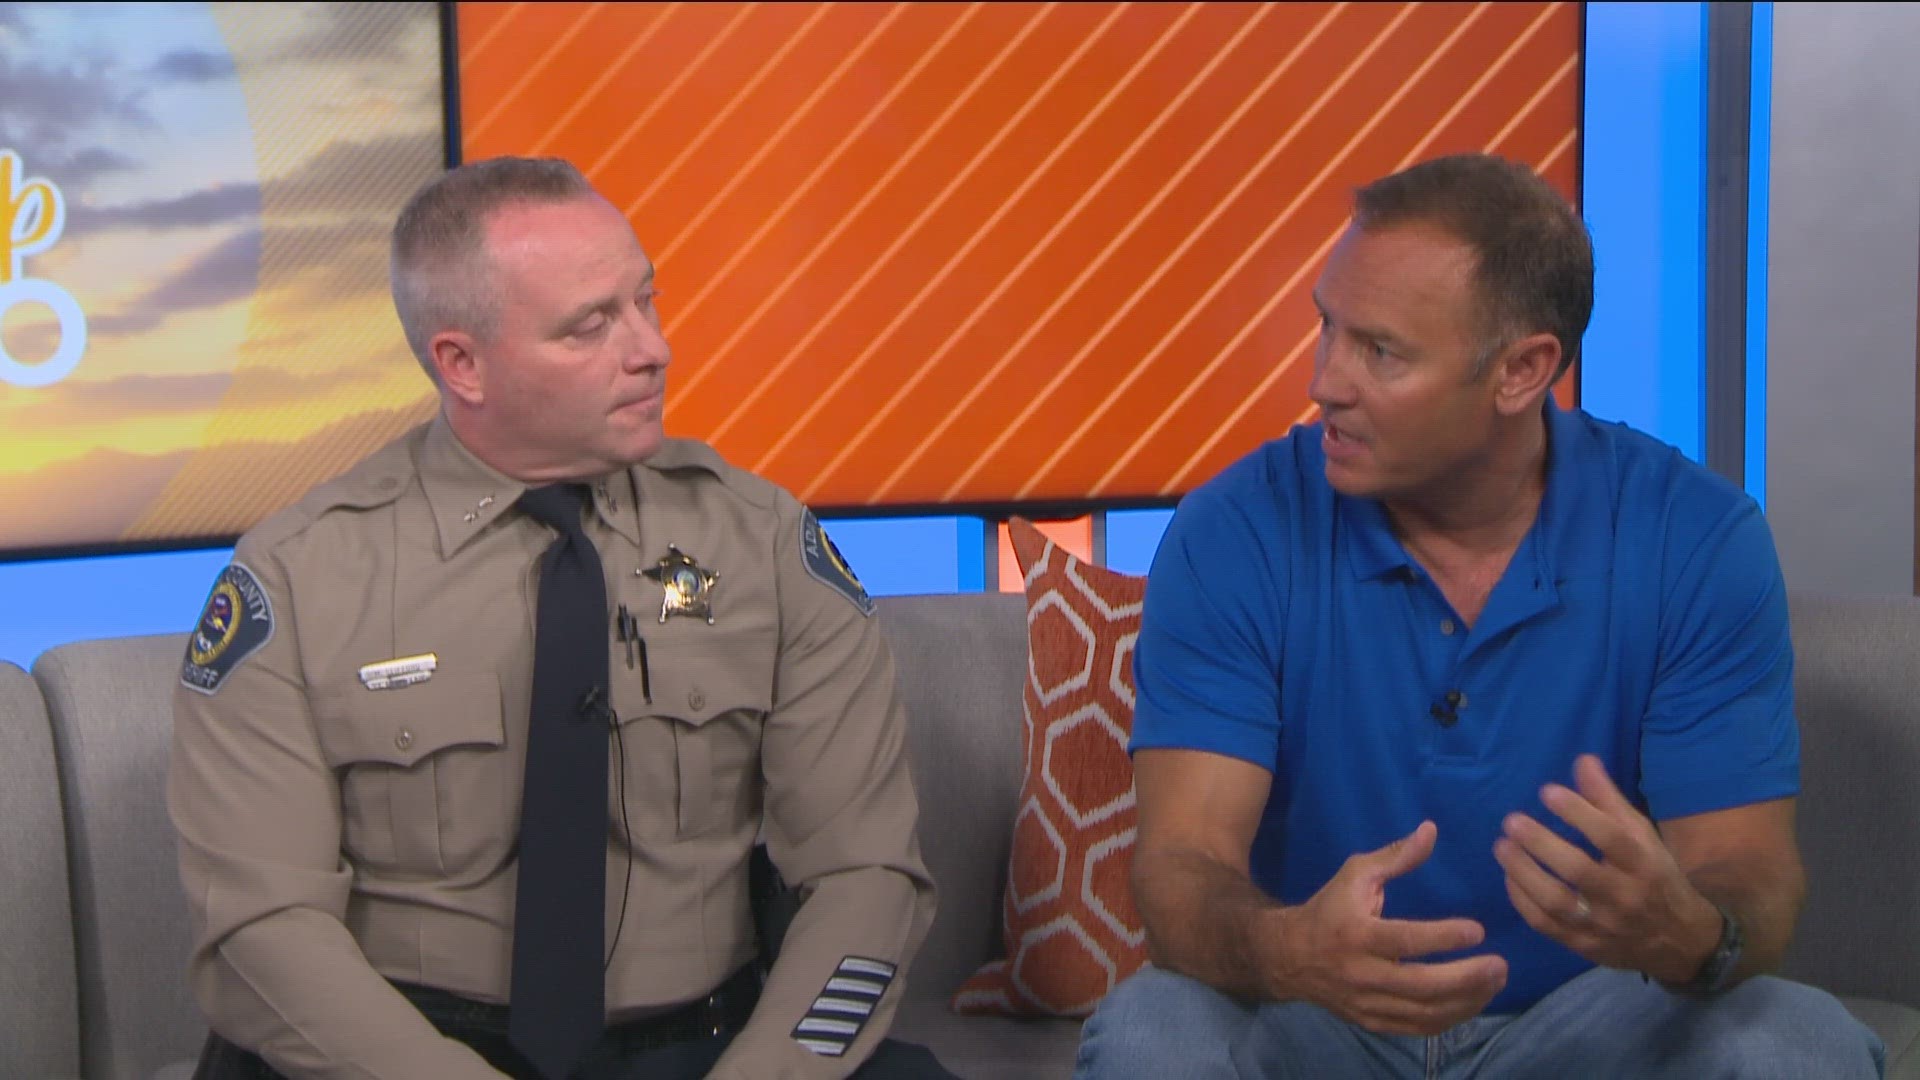 Retired Navy SEAL officer David Sears and Ada County Sheriff Matt Clifford talked about the upcoming event and the message behind it Wednesday morning on KTVB.